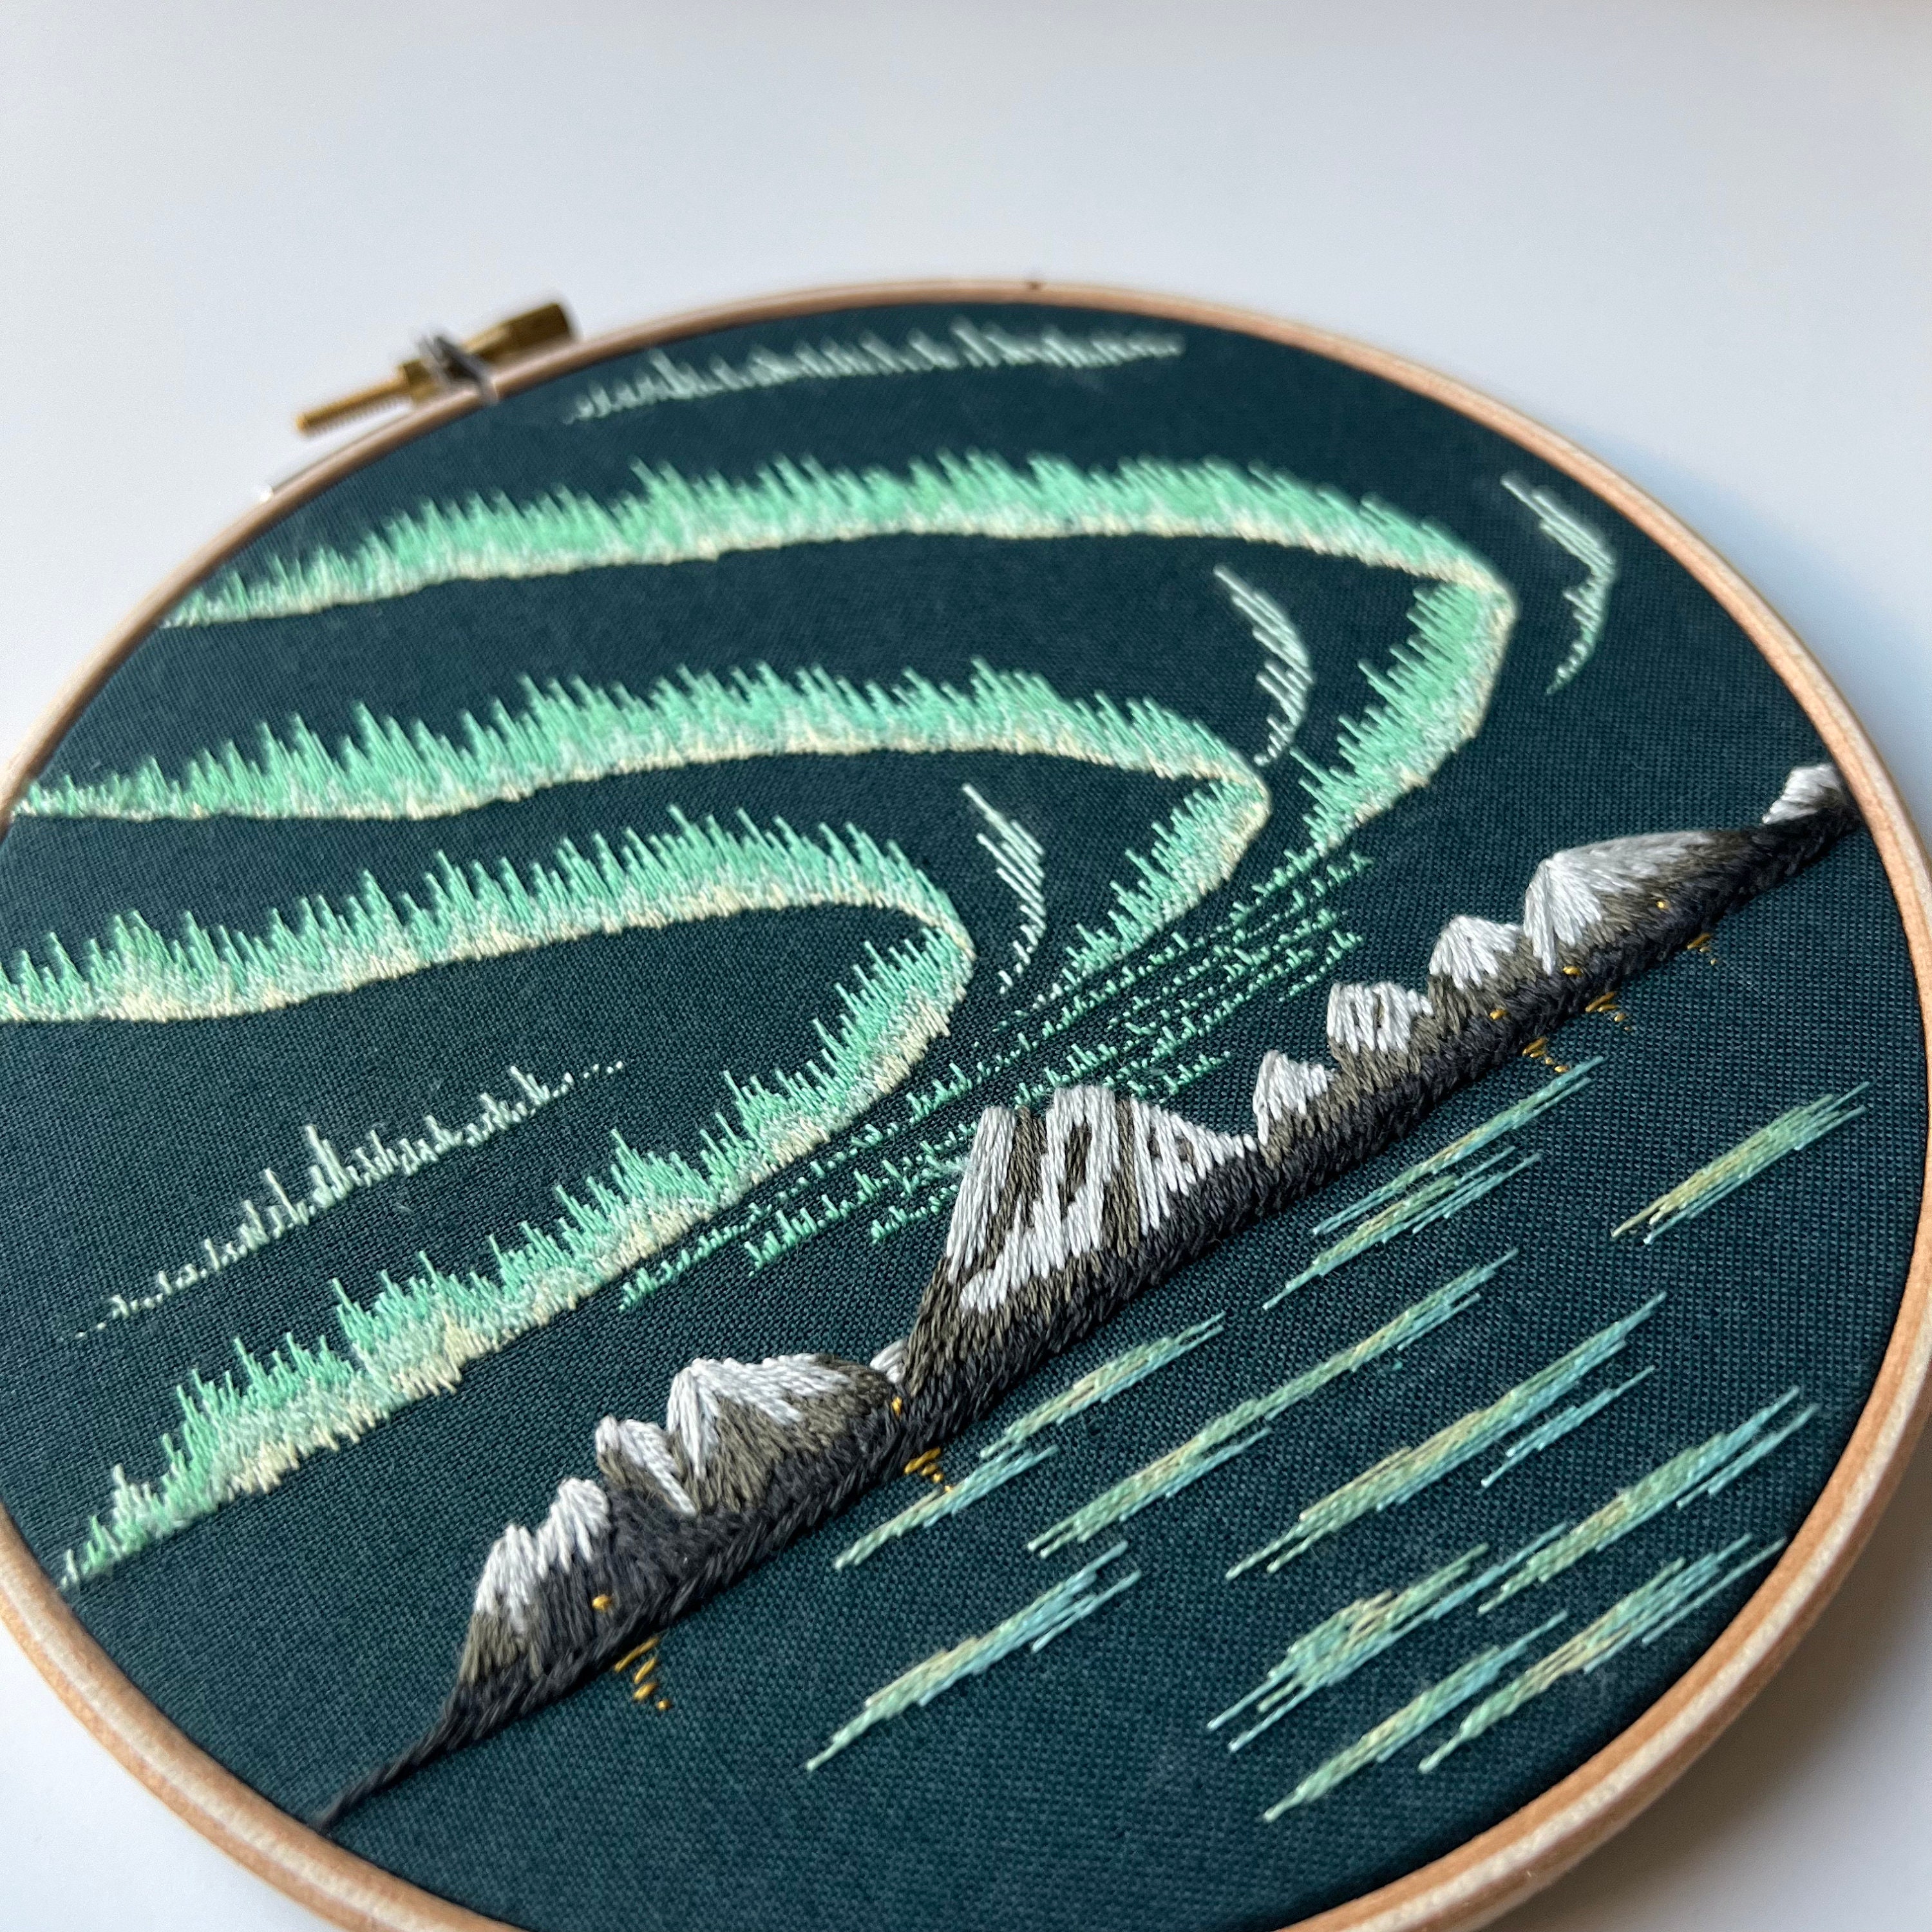 embroidered landscape, embroidery art, northern lights - Crealandia